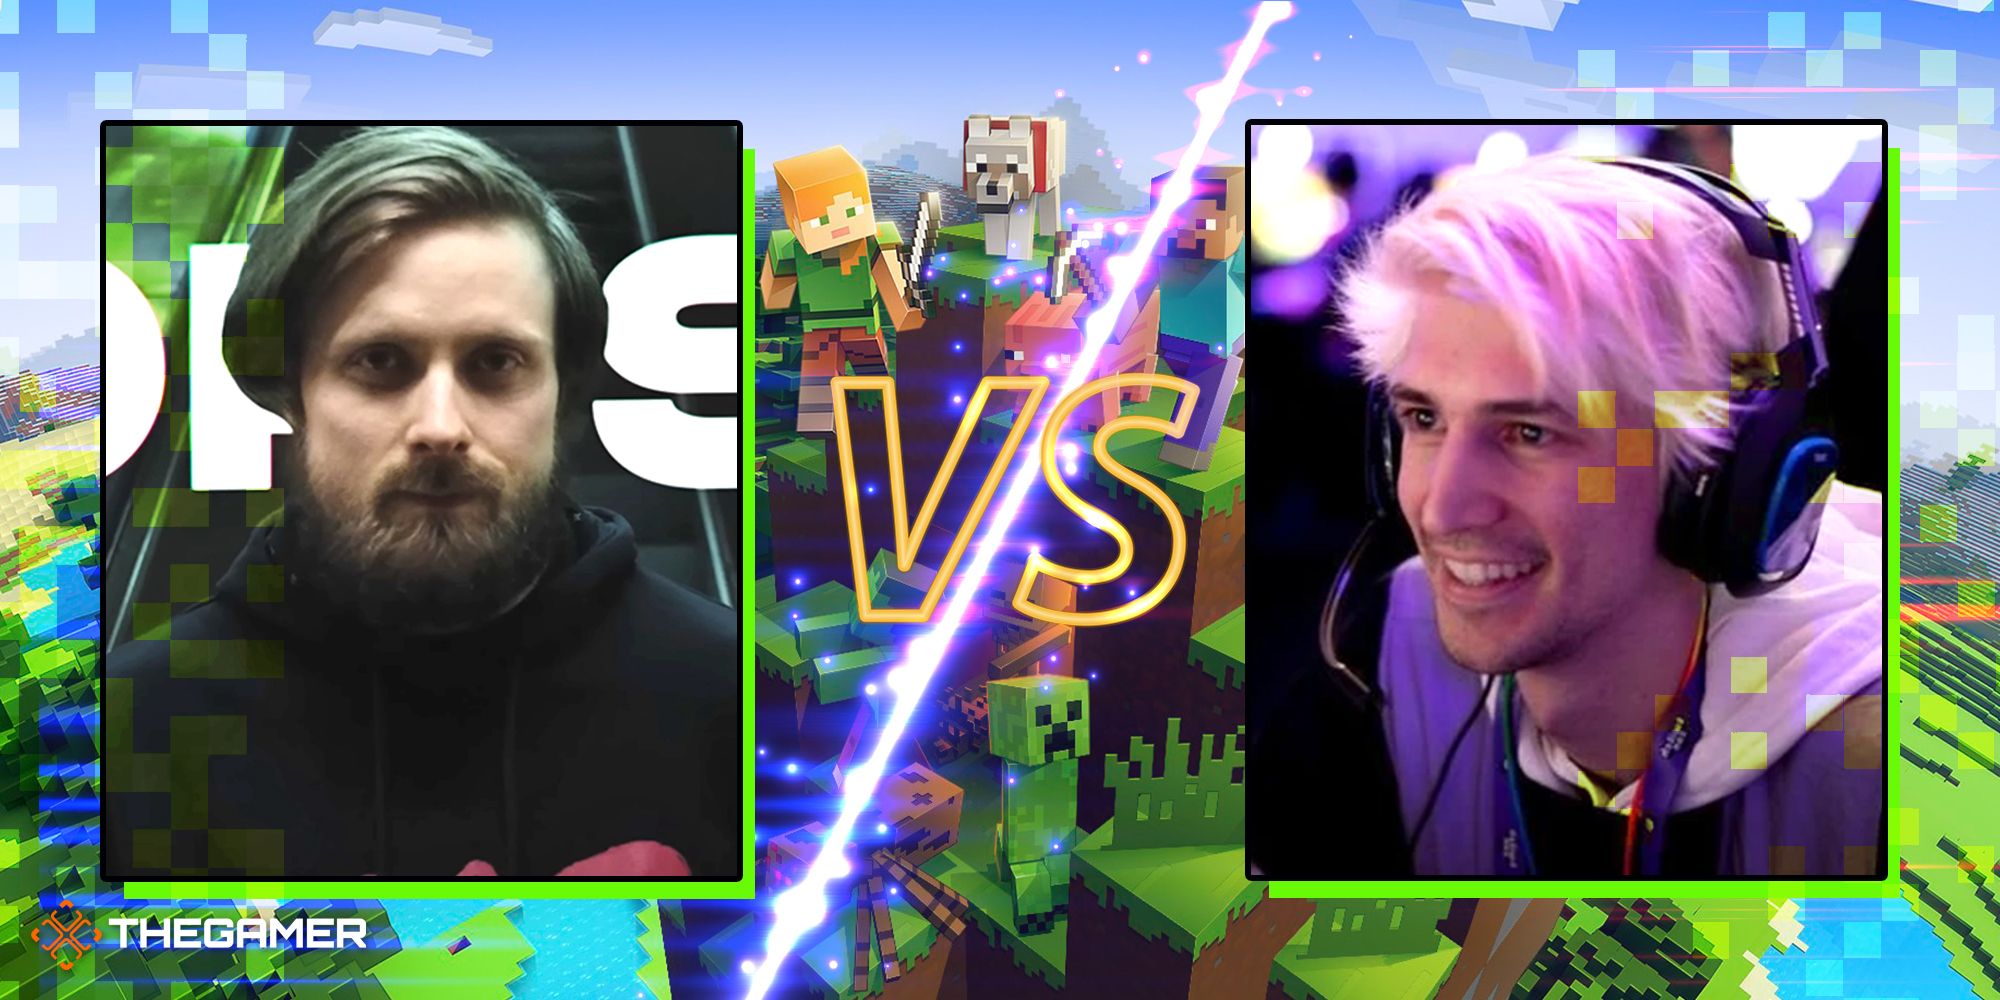 A split image showing Forsen on the left side and xQc on the right with Minecraft in the background